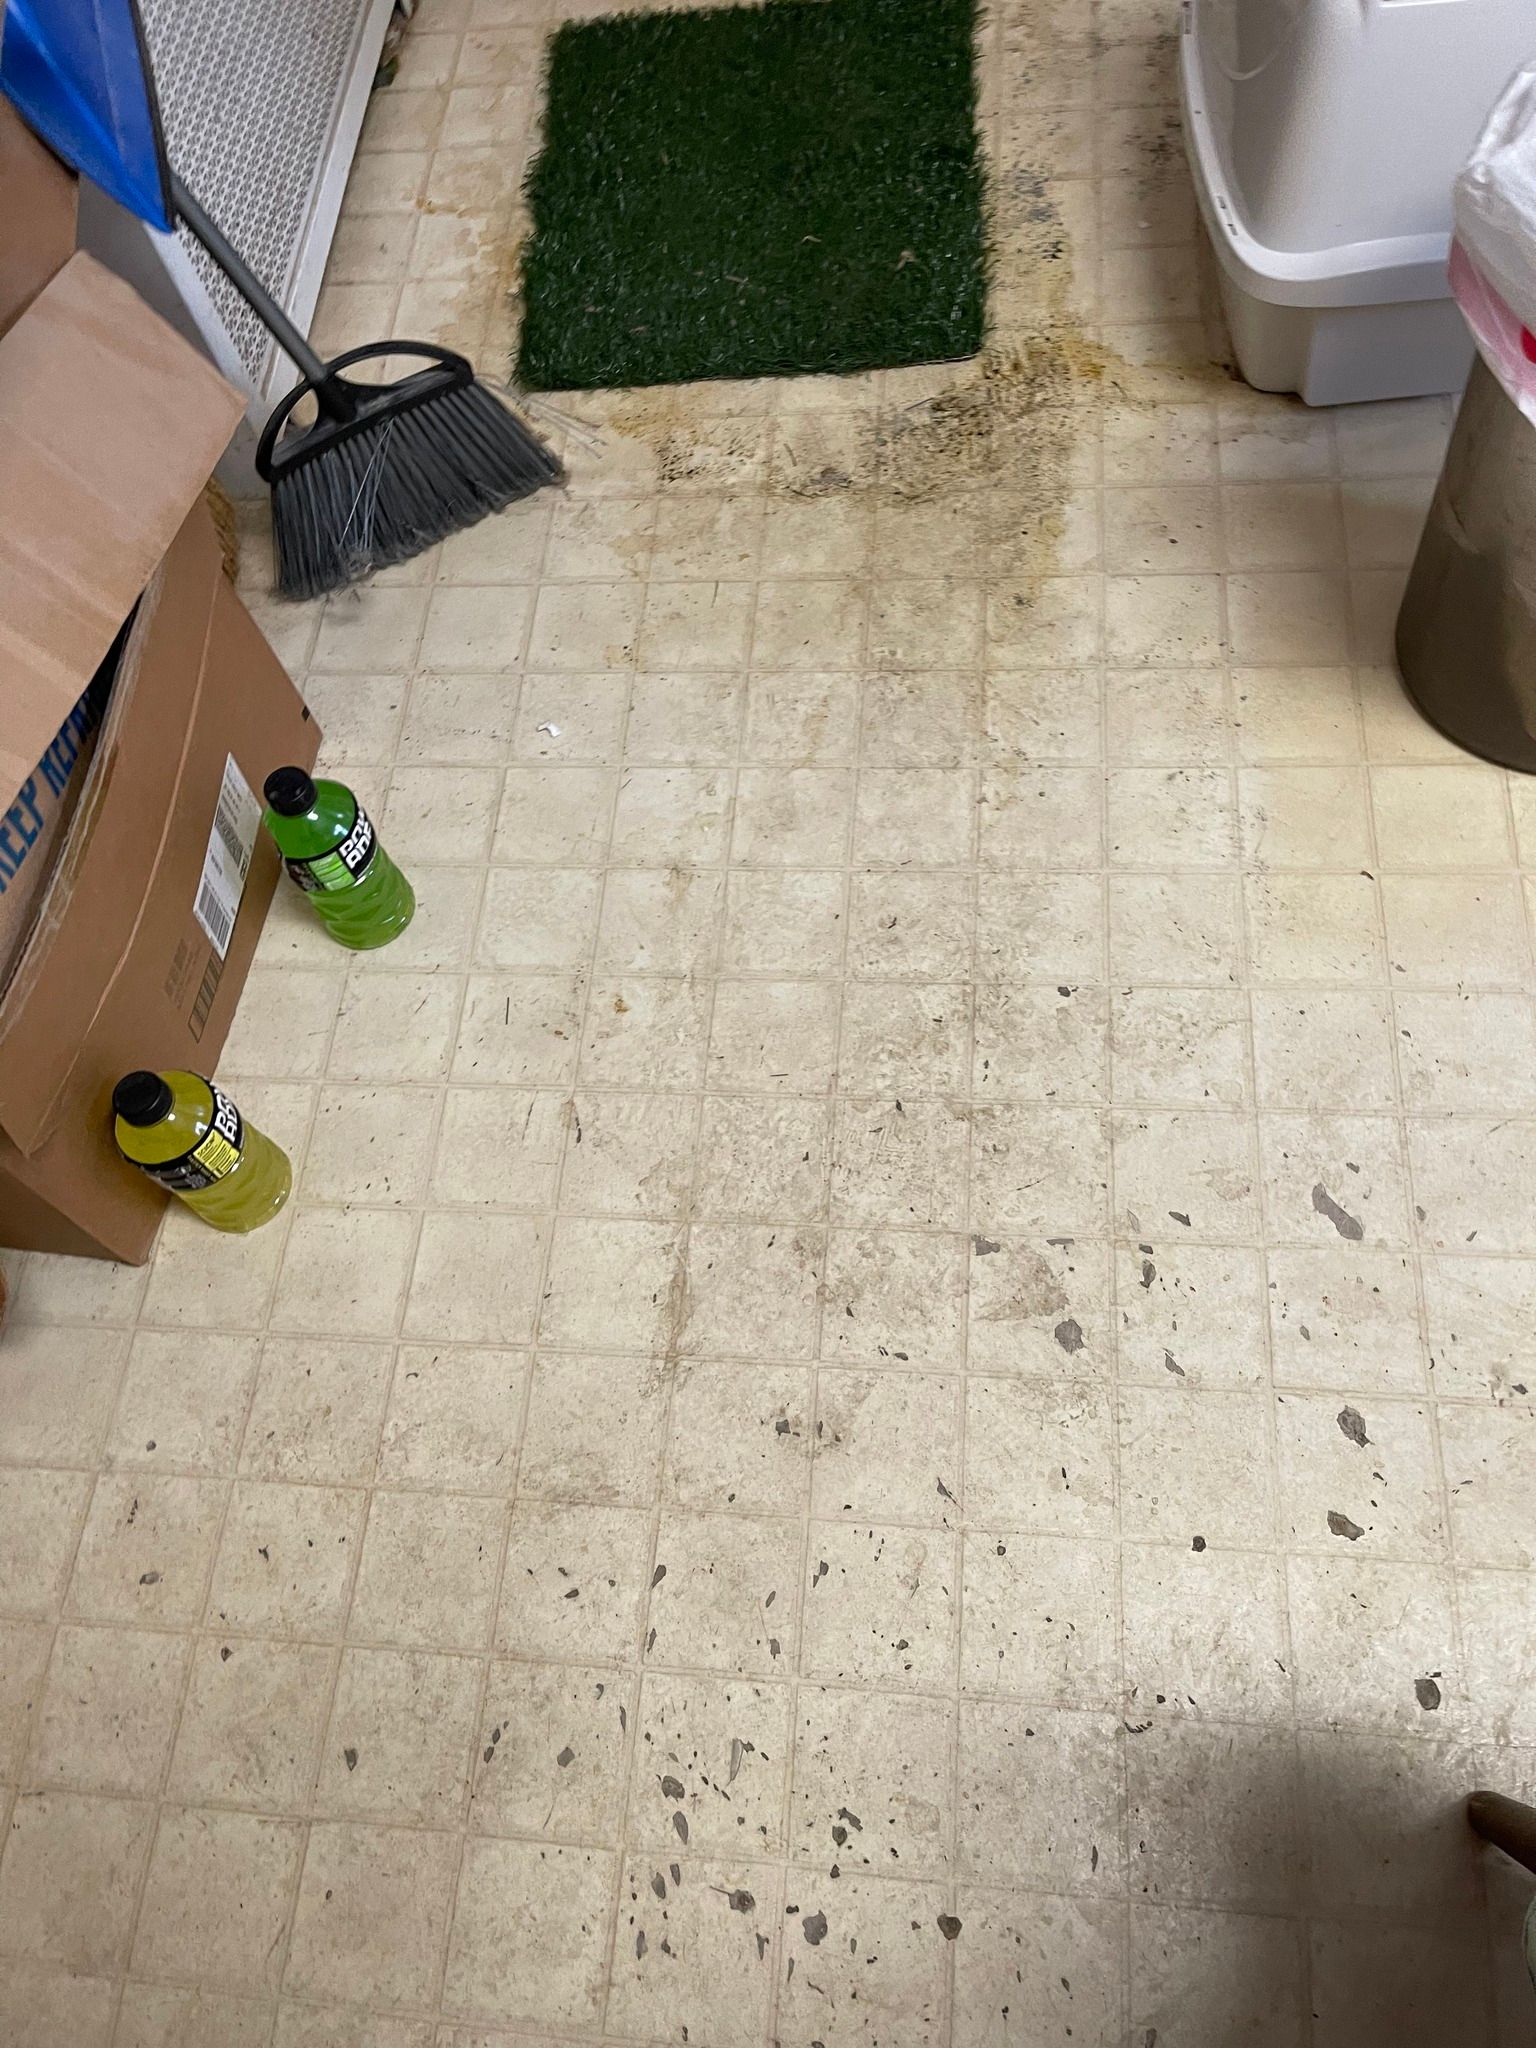 Before image of a dirty floor next to a boxes